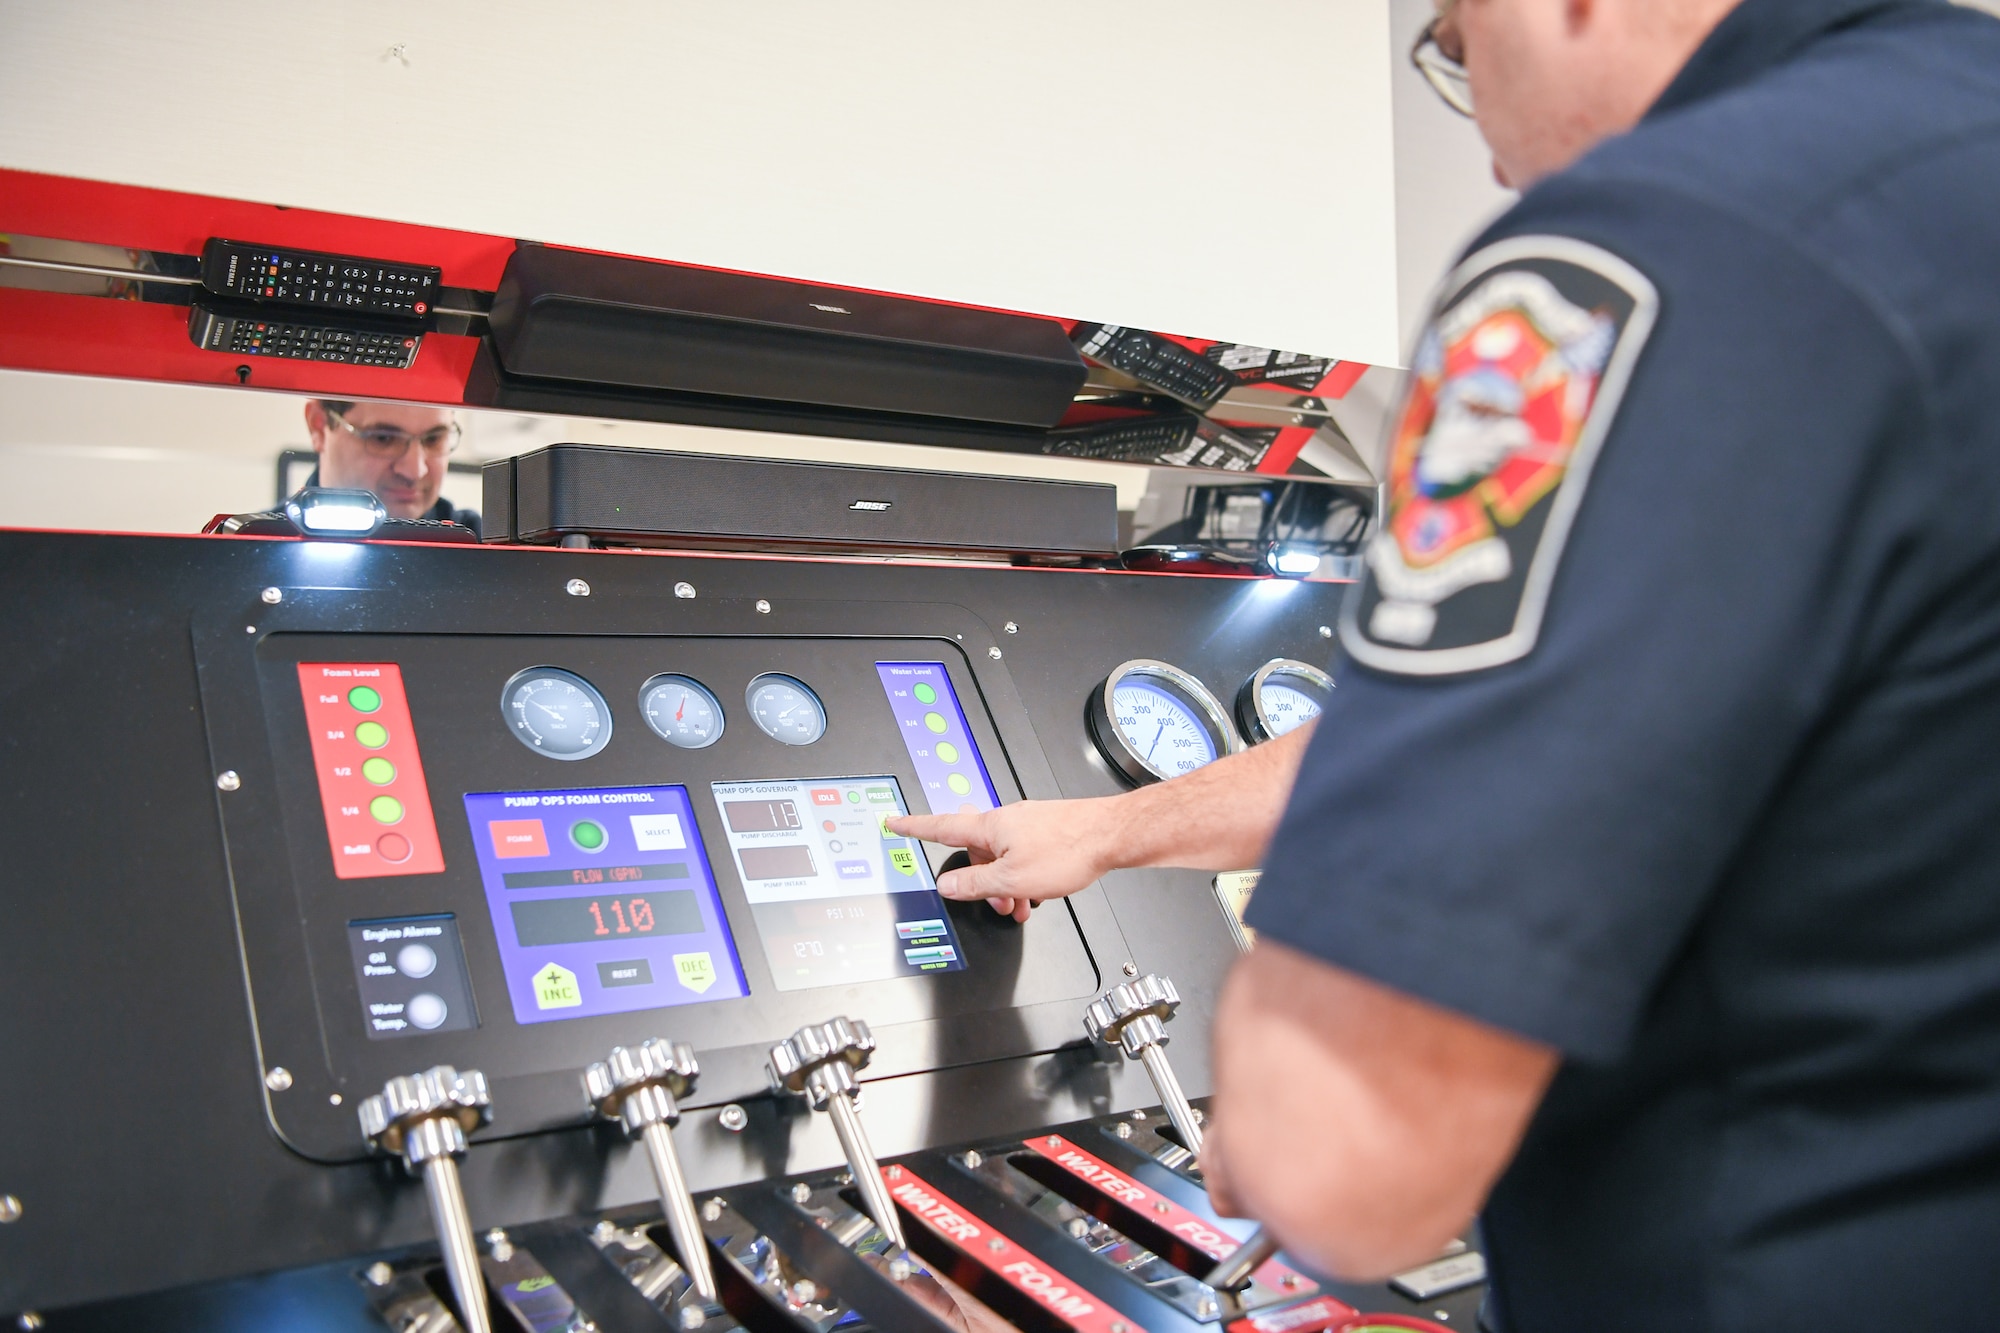 Jason Medina, Fire and Emergency Services driver operator, touches a digital screen on a pump simulator panel that is adorned with handles,dials and gauges.